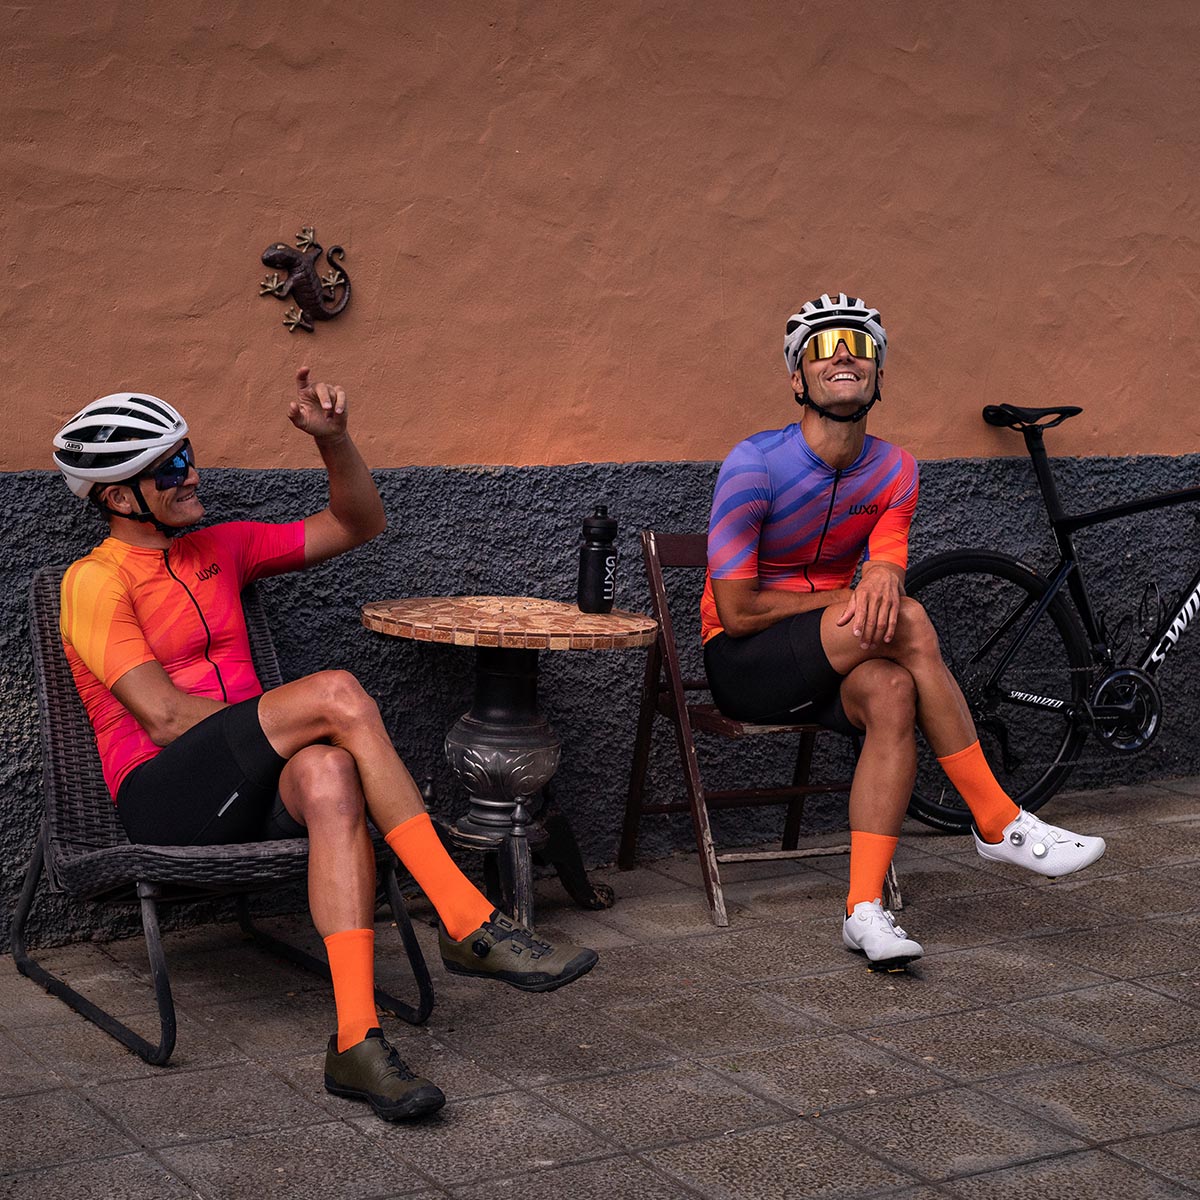 Two cycling friends are smiling when waiting for coffee in the Tenerife small town and wearing Luxa cycling kit from 2023 season